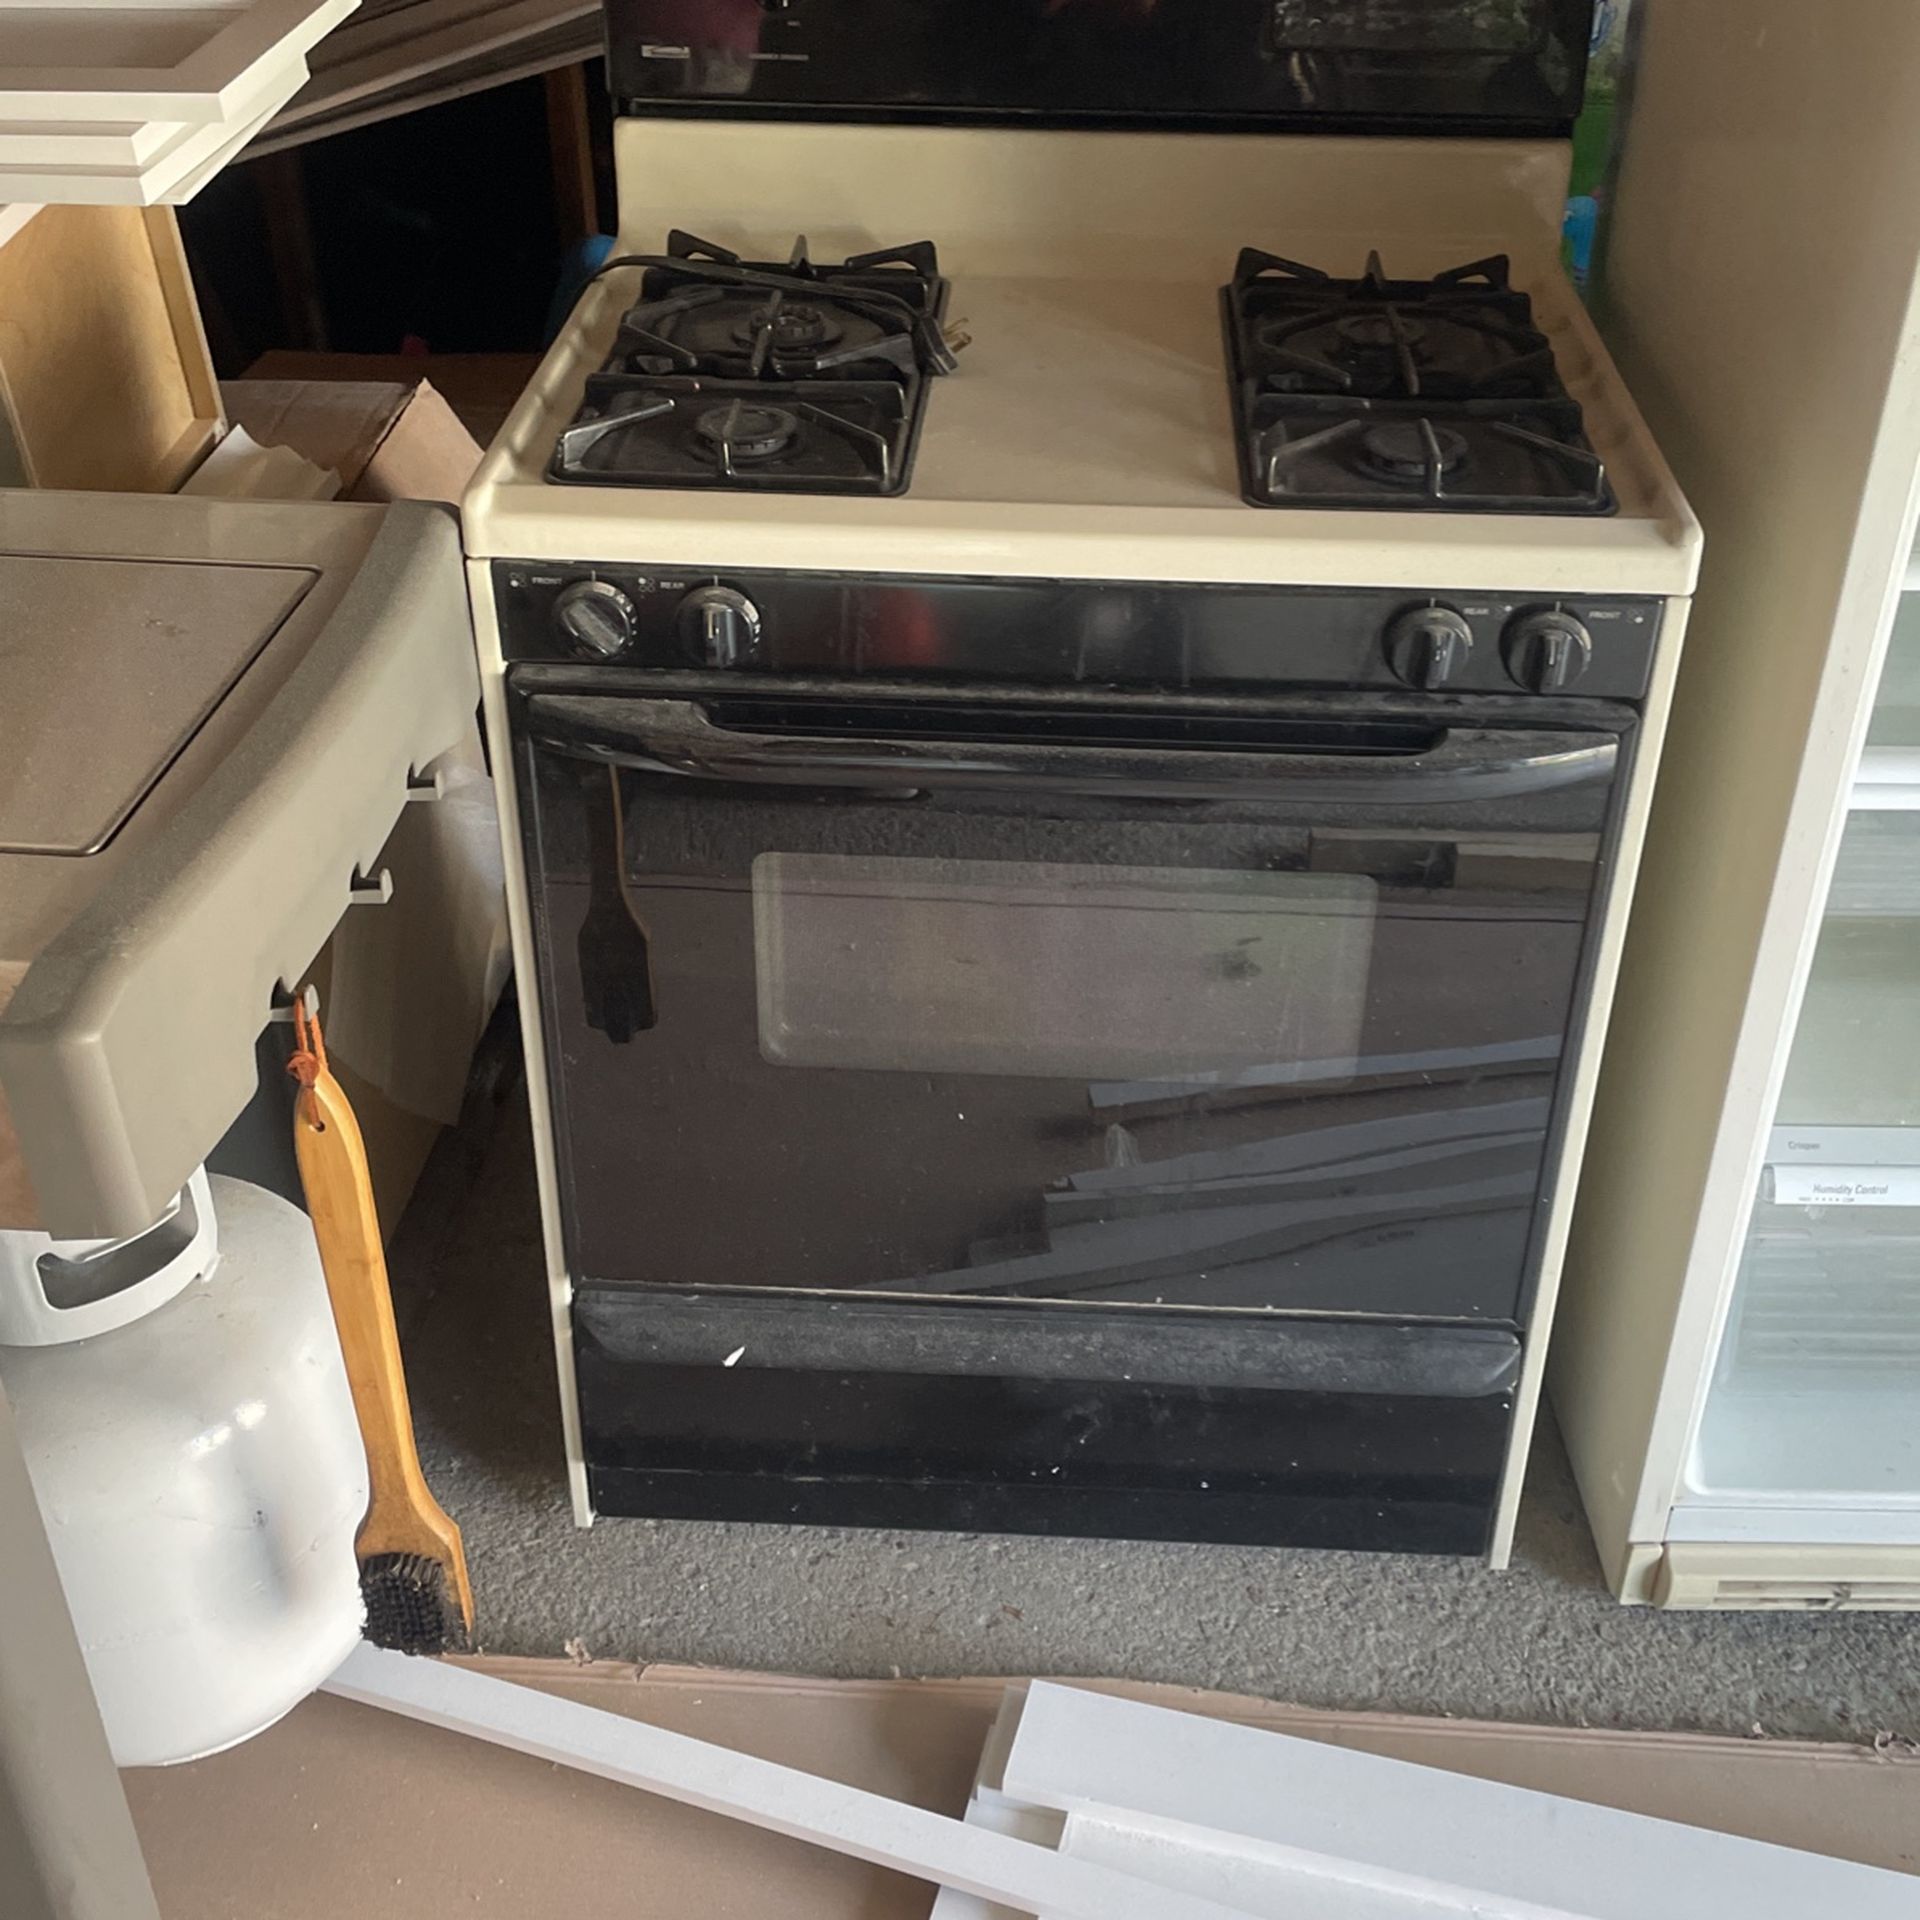 Kenmore Oven And Fridge